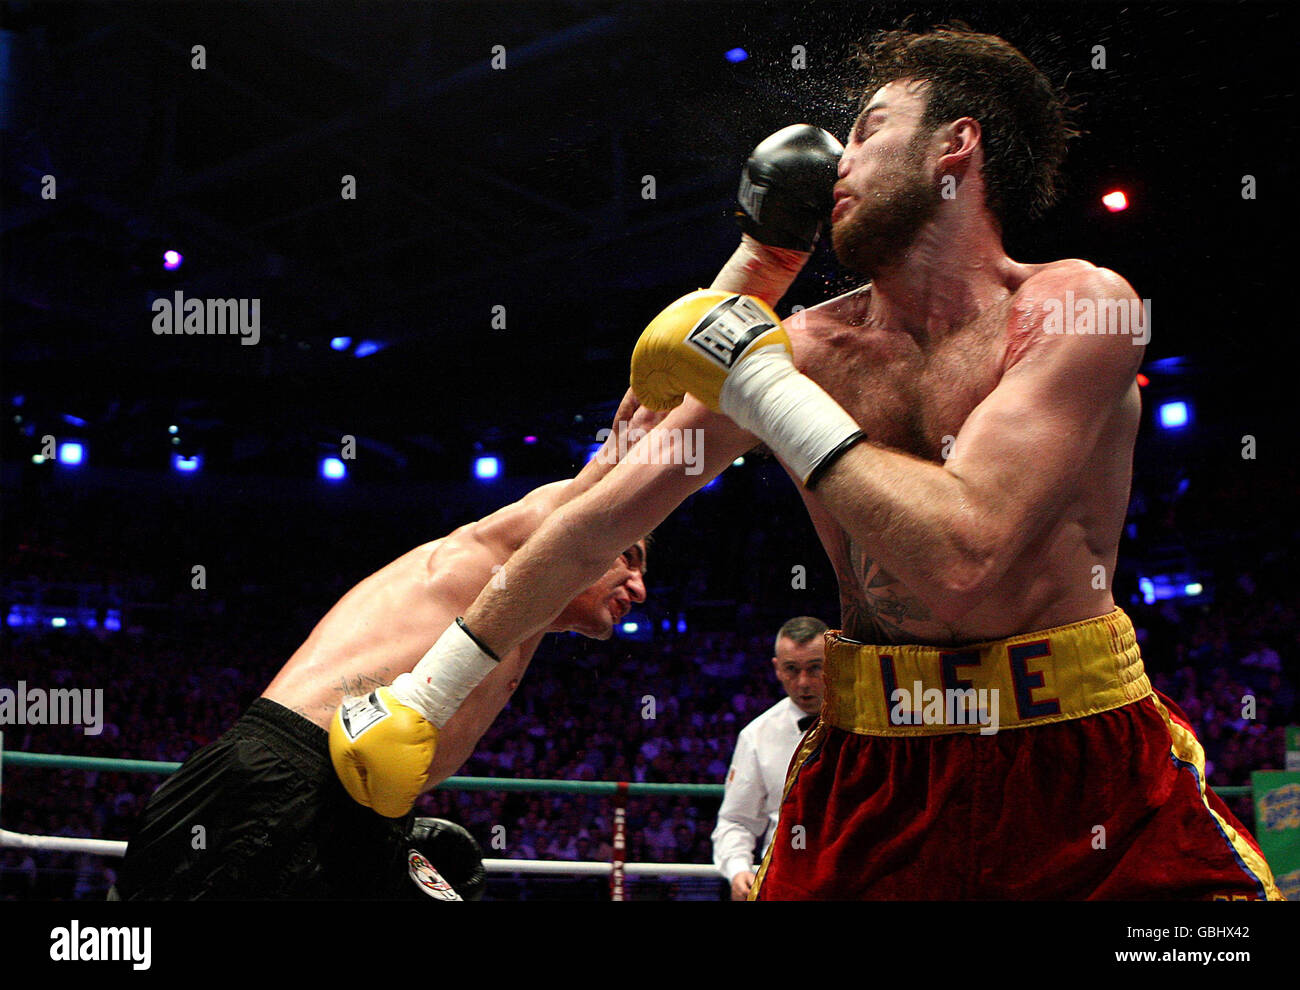 Boxing - Andy Lee v Alexander Sipos - Middleweight Bout - Dublin O2 Arena. Ireland's Andy Lee on his way to victory over Alexander Sipos in their Middleweight Bout at the O2 Arena in Dublin, Ireland. Stock Photo